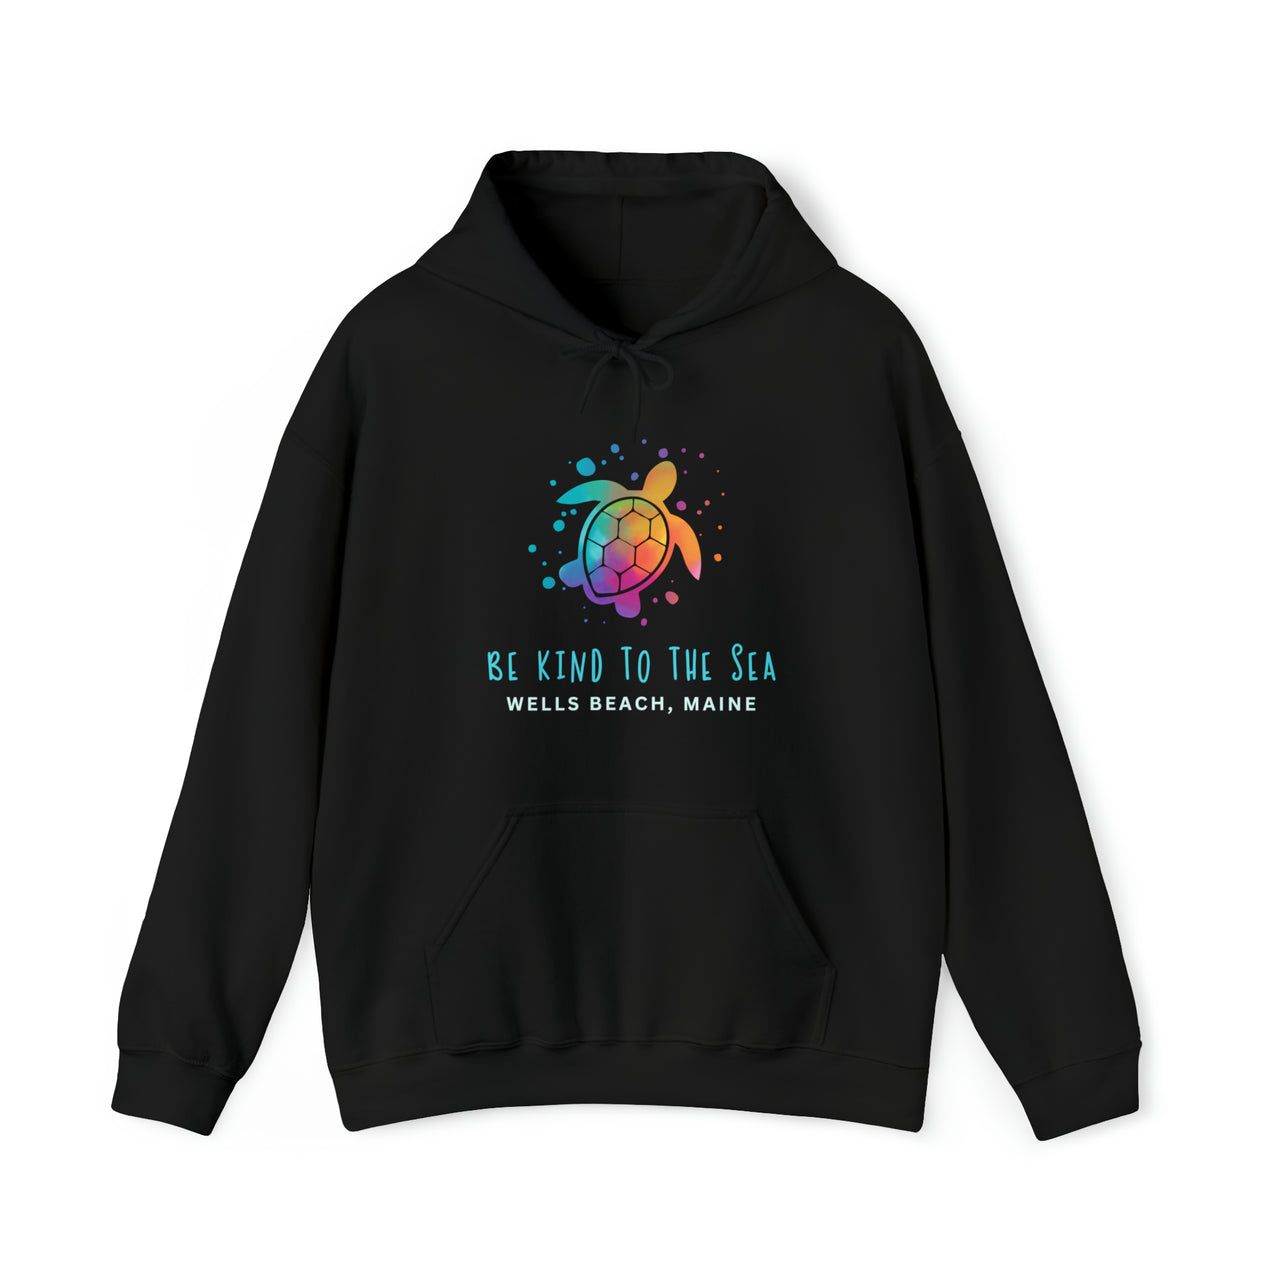 Be Kind to the Sea Heavy Blend Hooded Sweatshirt, Personalized, Black